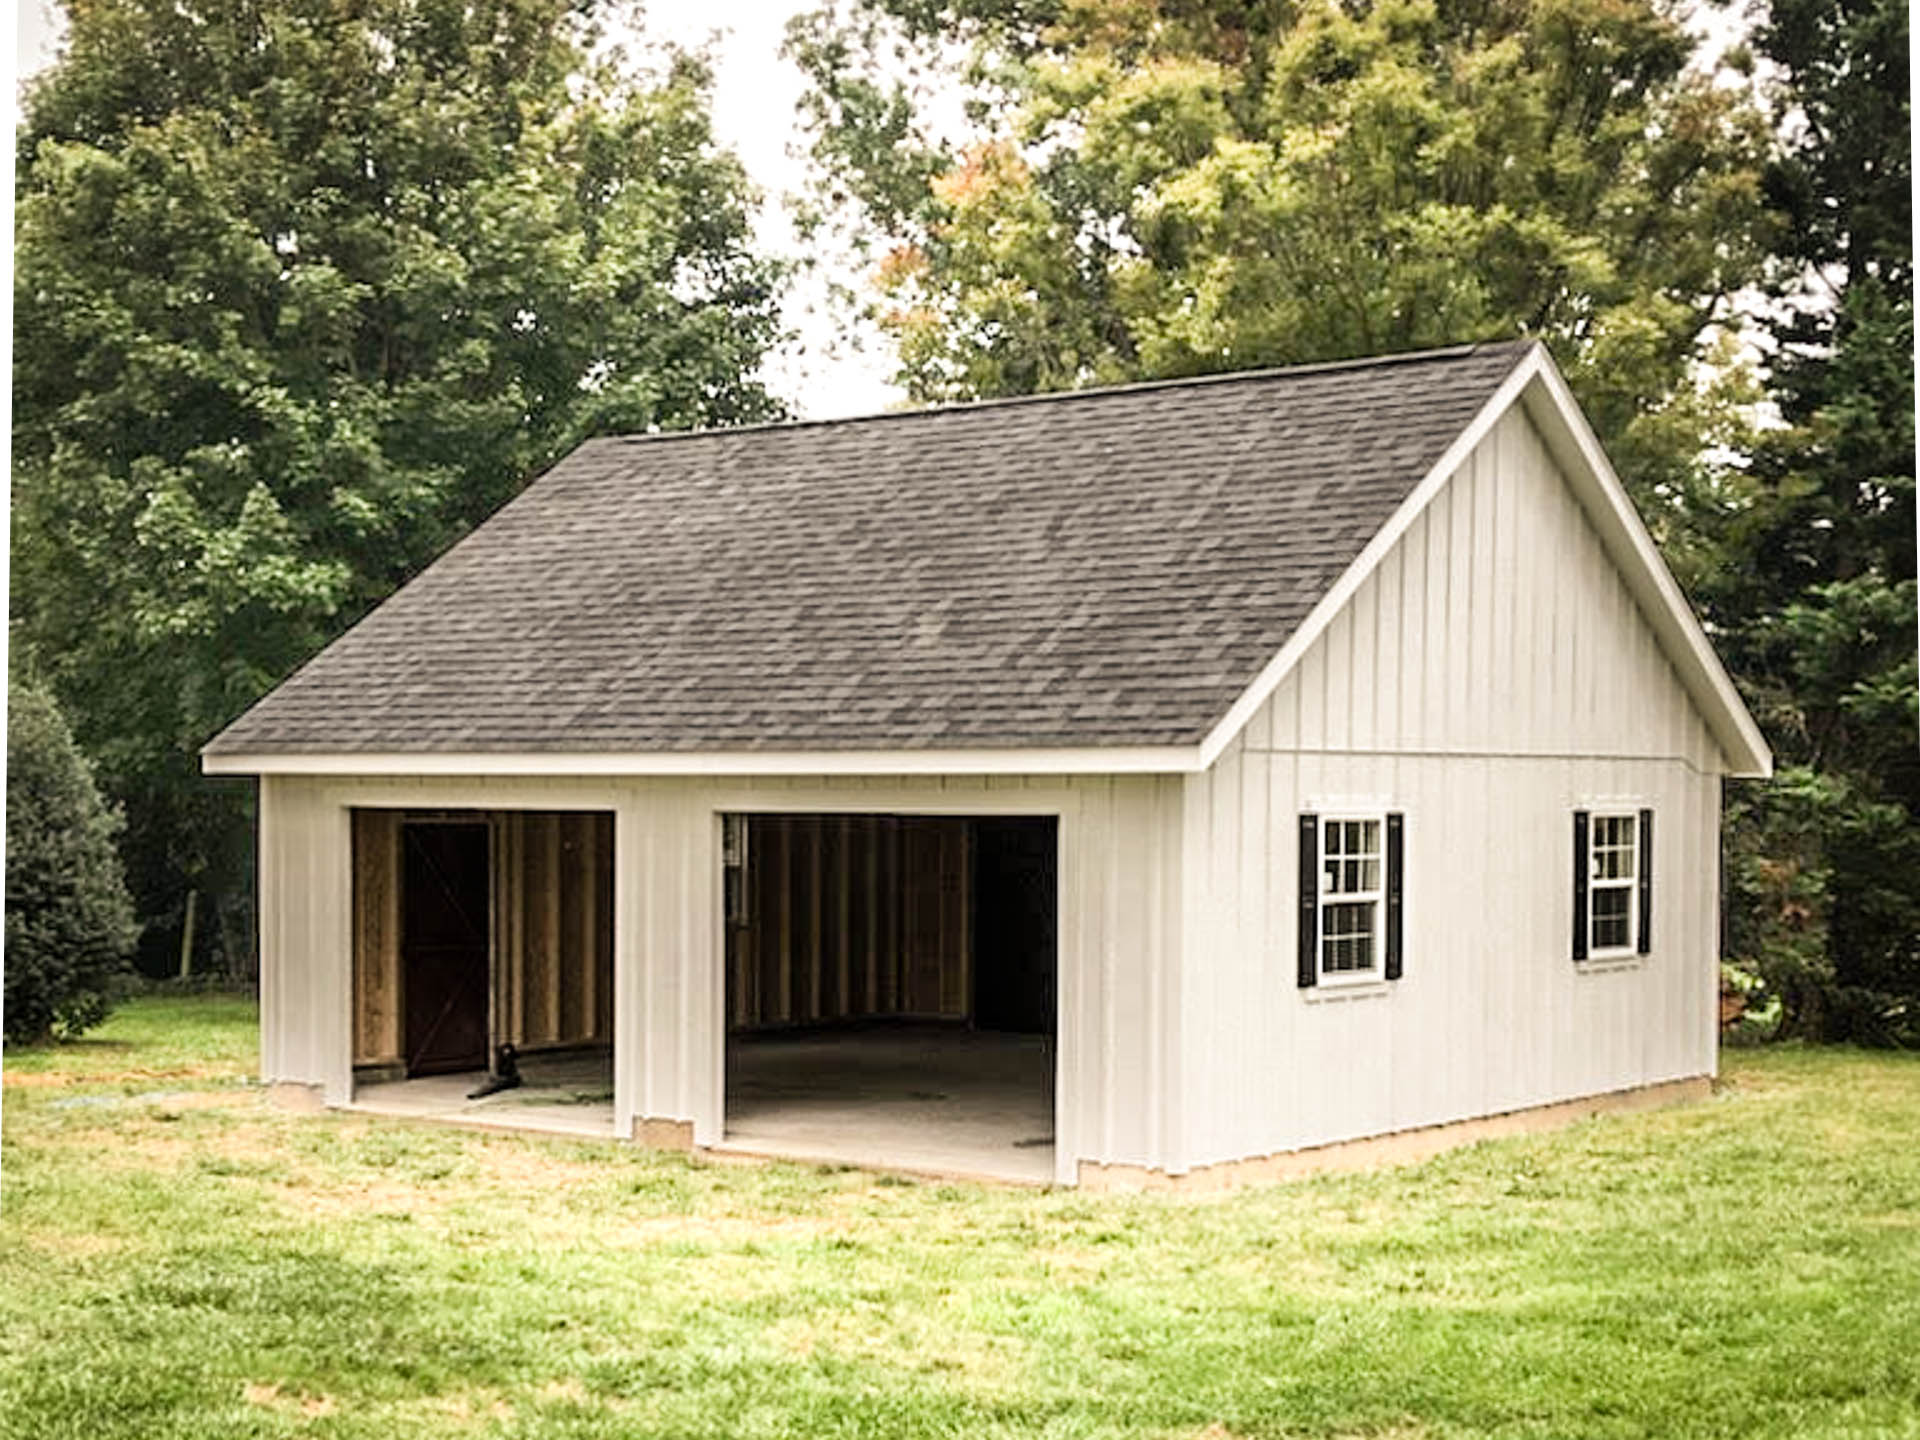 24x26 garage in mtairy md 2